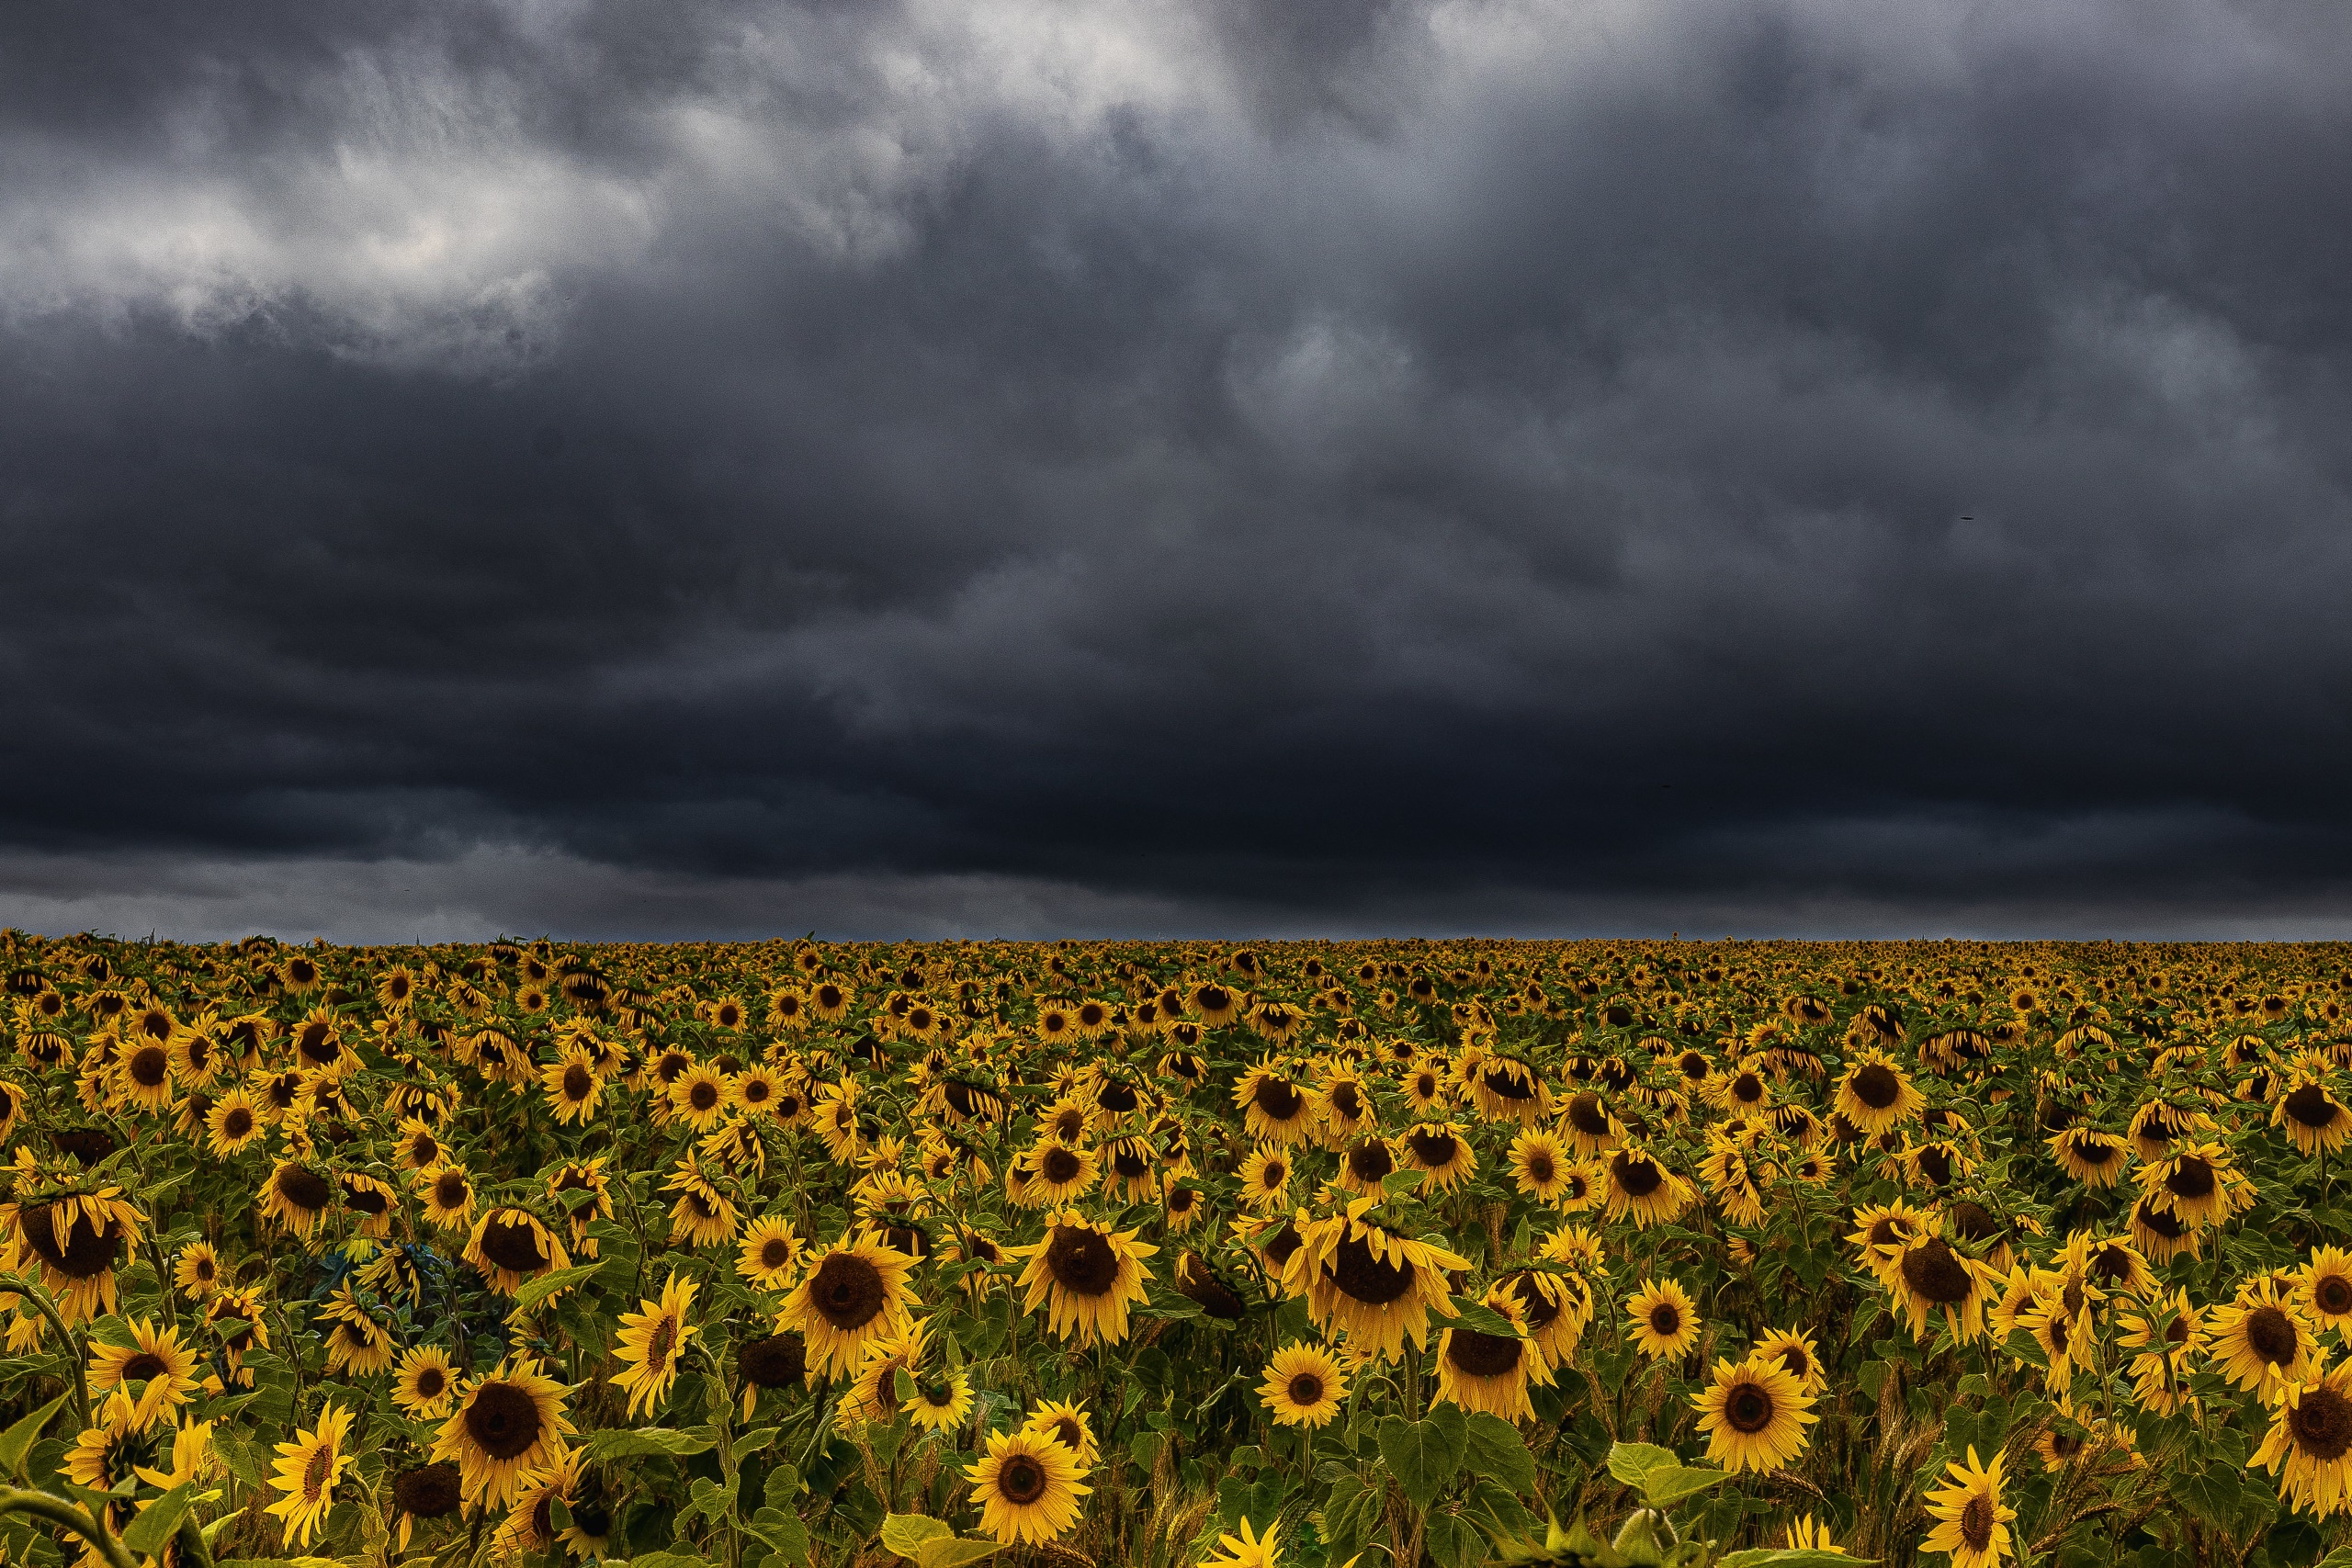 General 2560x1707 outdoors landscape dark clouds field Agro (Plants) sunflowers flowers yellow flowers plants nature